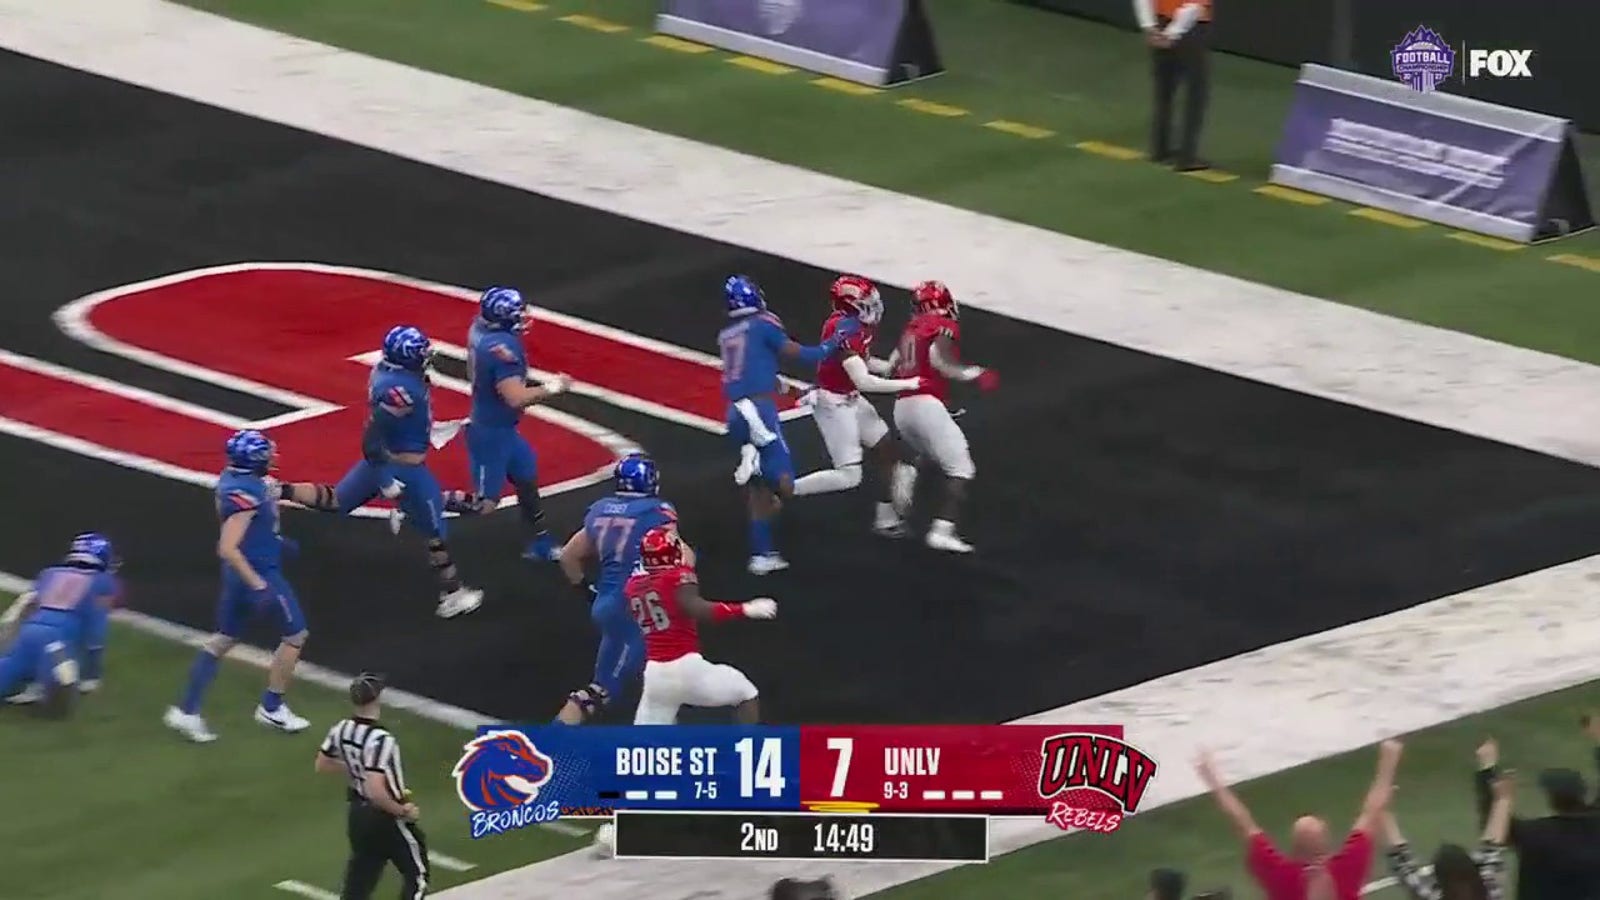 Fred Thompkins comes away with a 47-yard pick-6 vs. Boise State